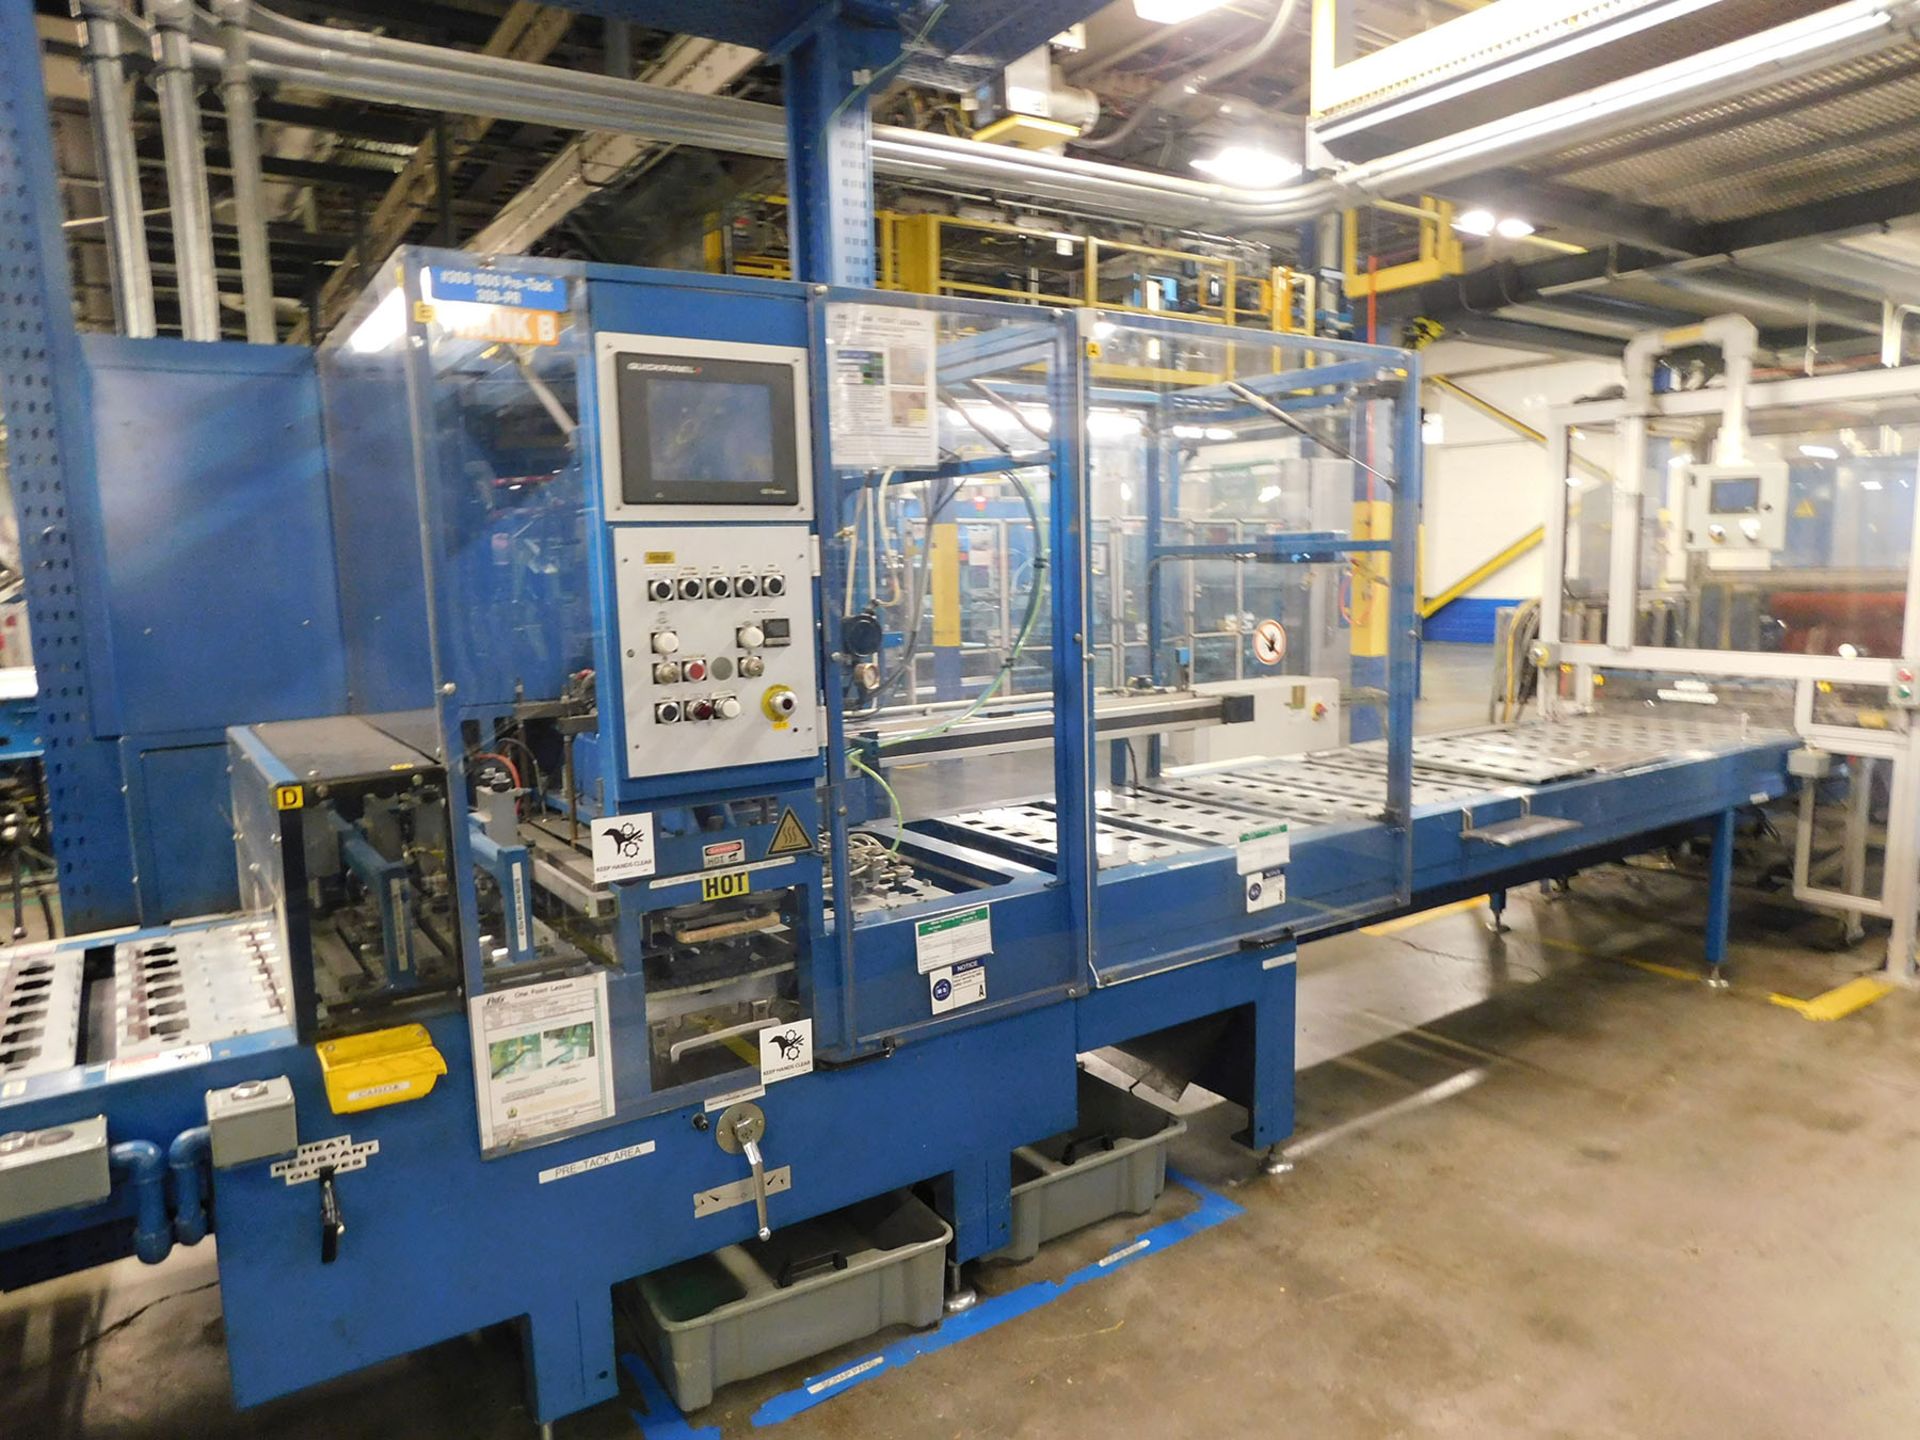 AA DURACELL BLISTER PACK LINE WITH FOLD OVER CASE LOADER, MOTORIZED ROLLER CONVEYOR AND ELEVATOR - Image 2 of 4